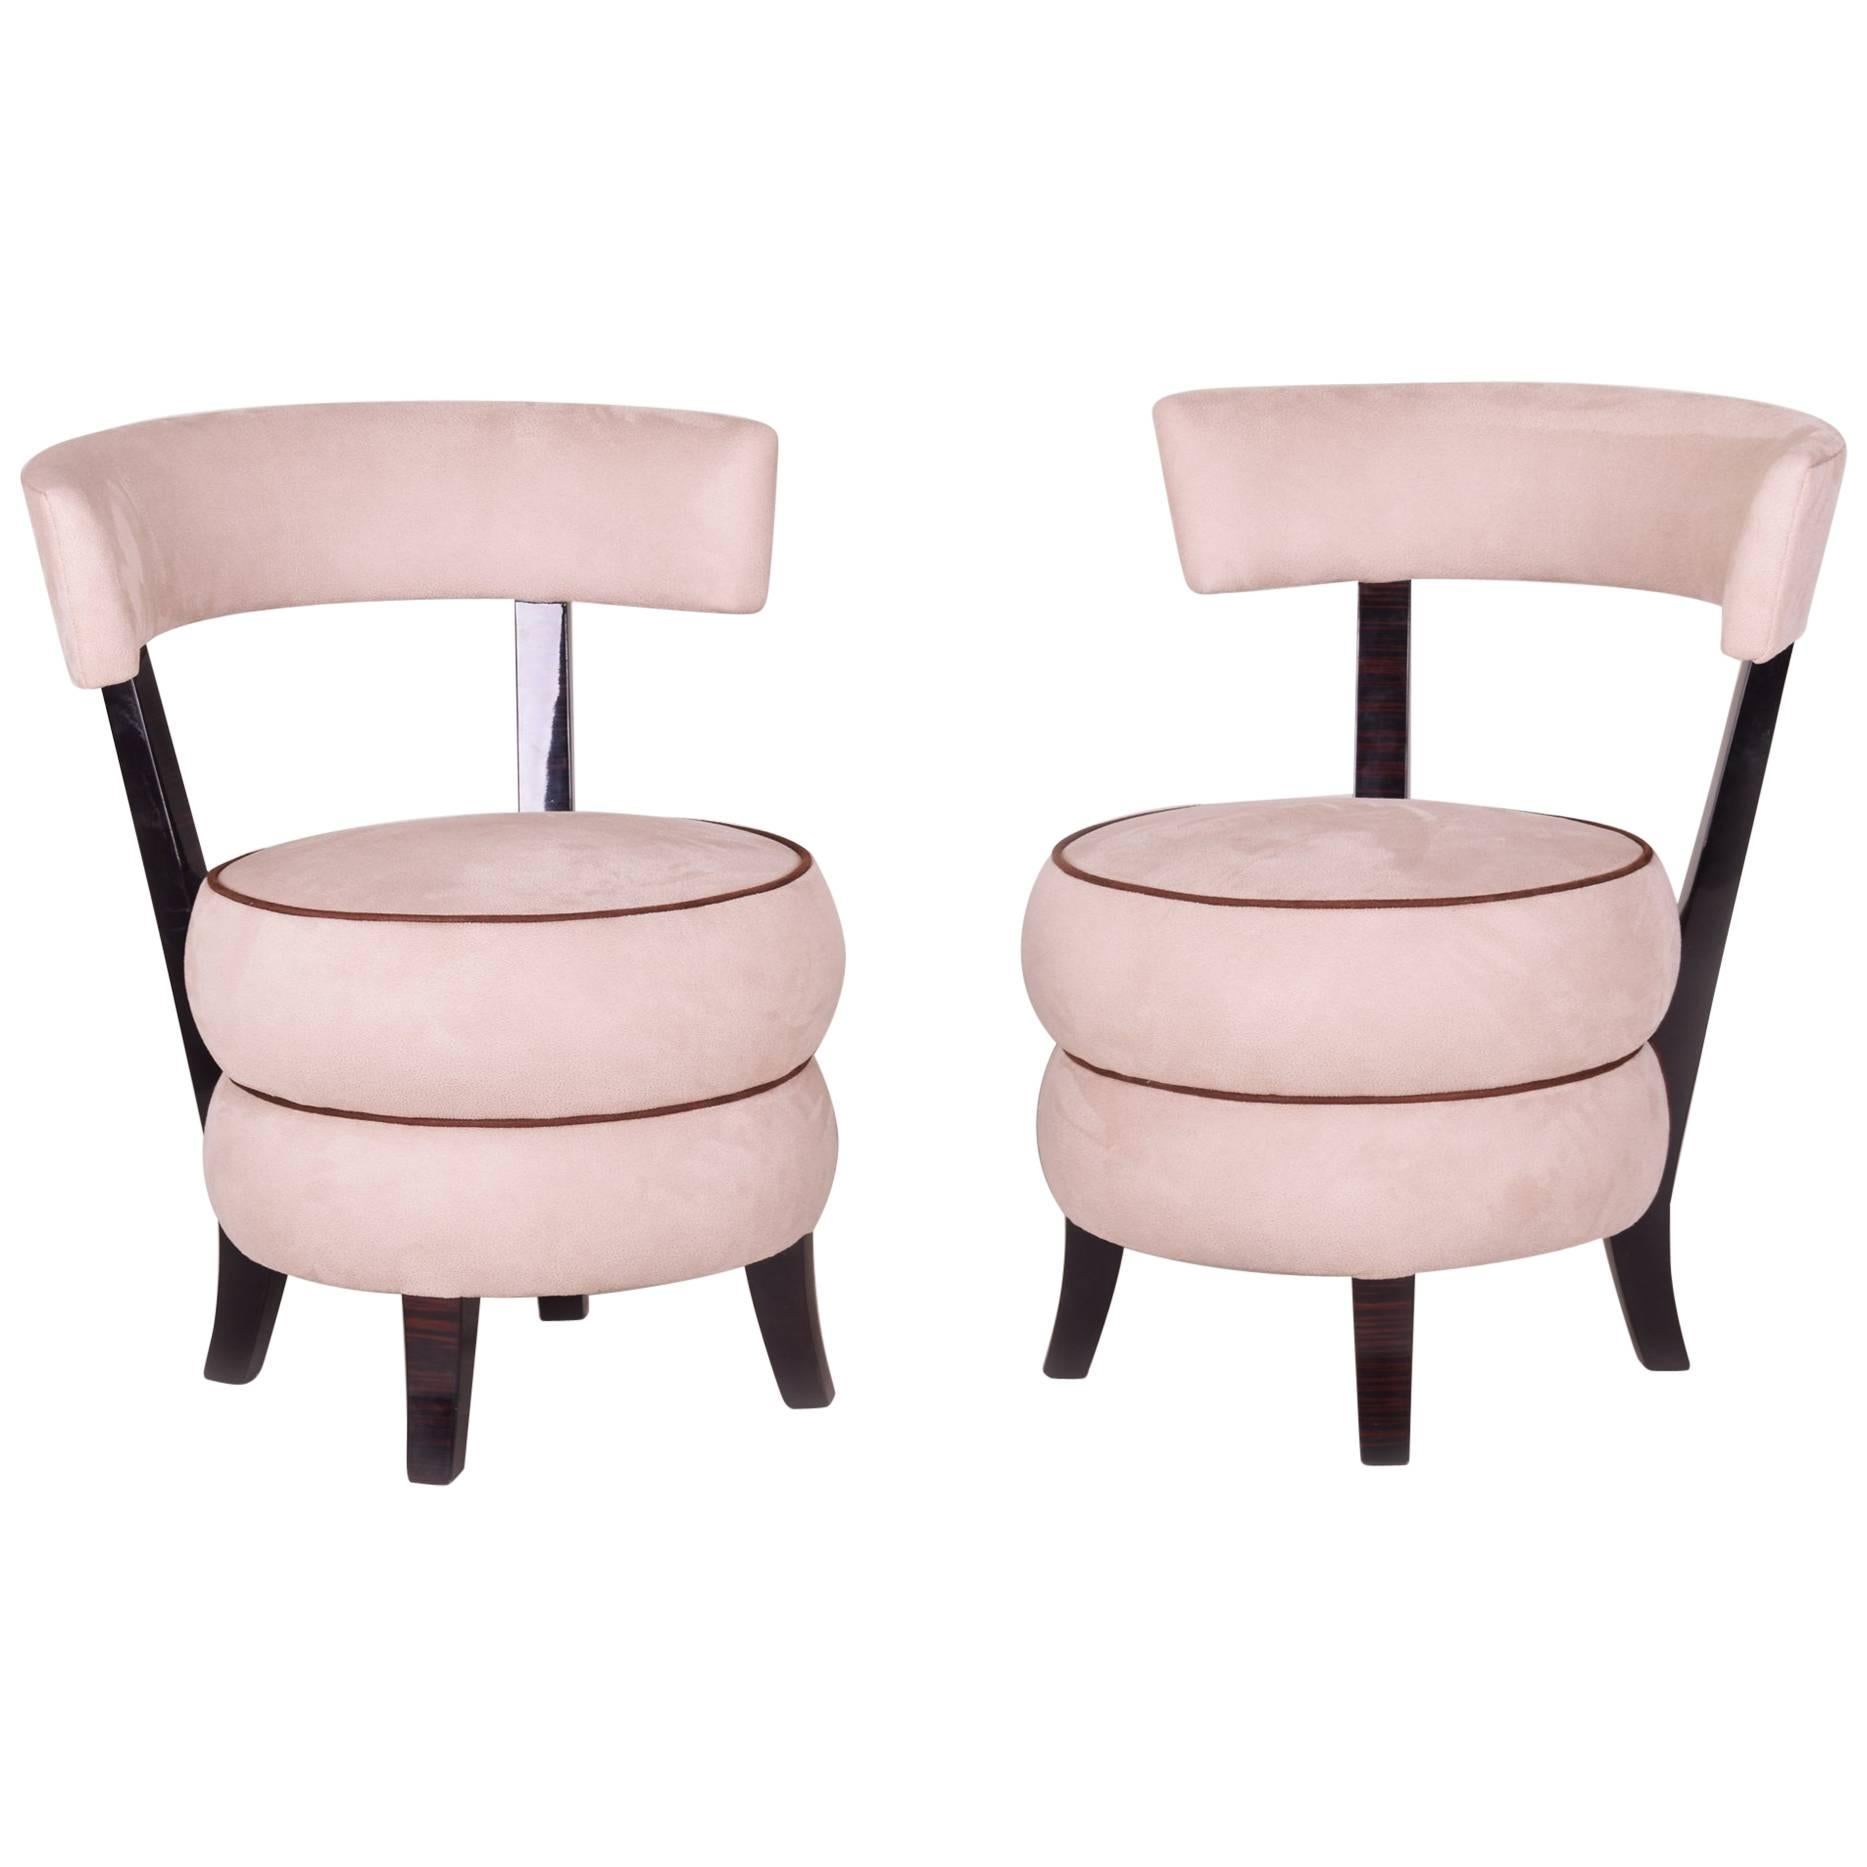 Pair of Art Deco Armchairs from France, Macassar